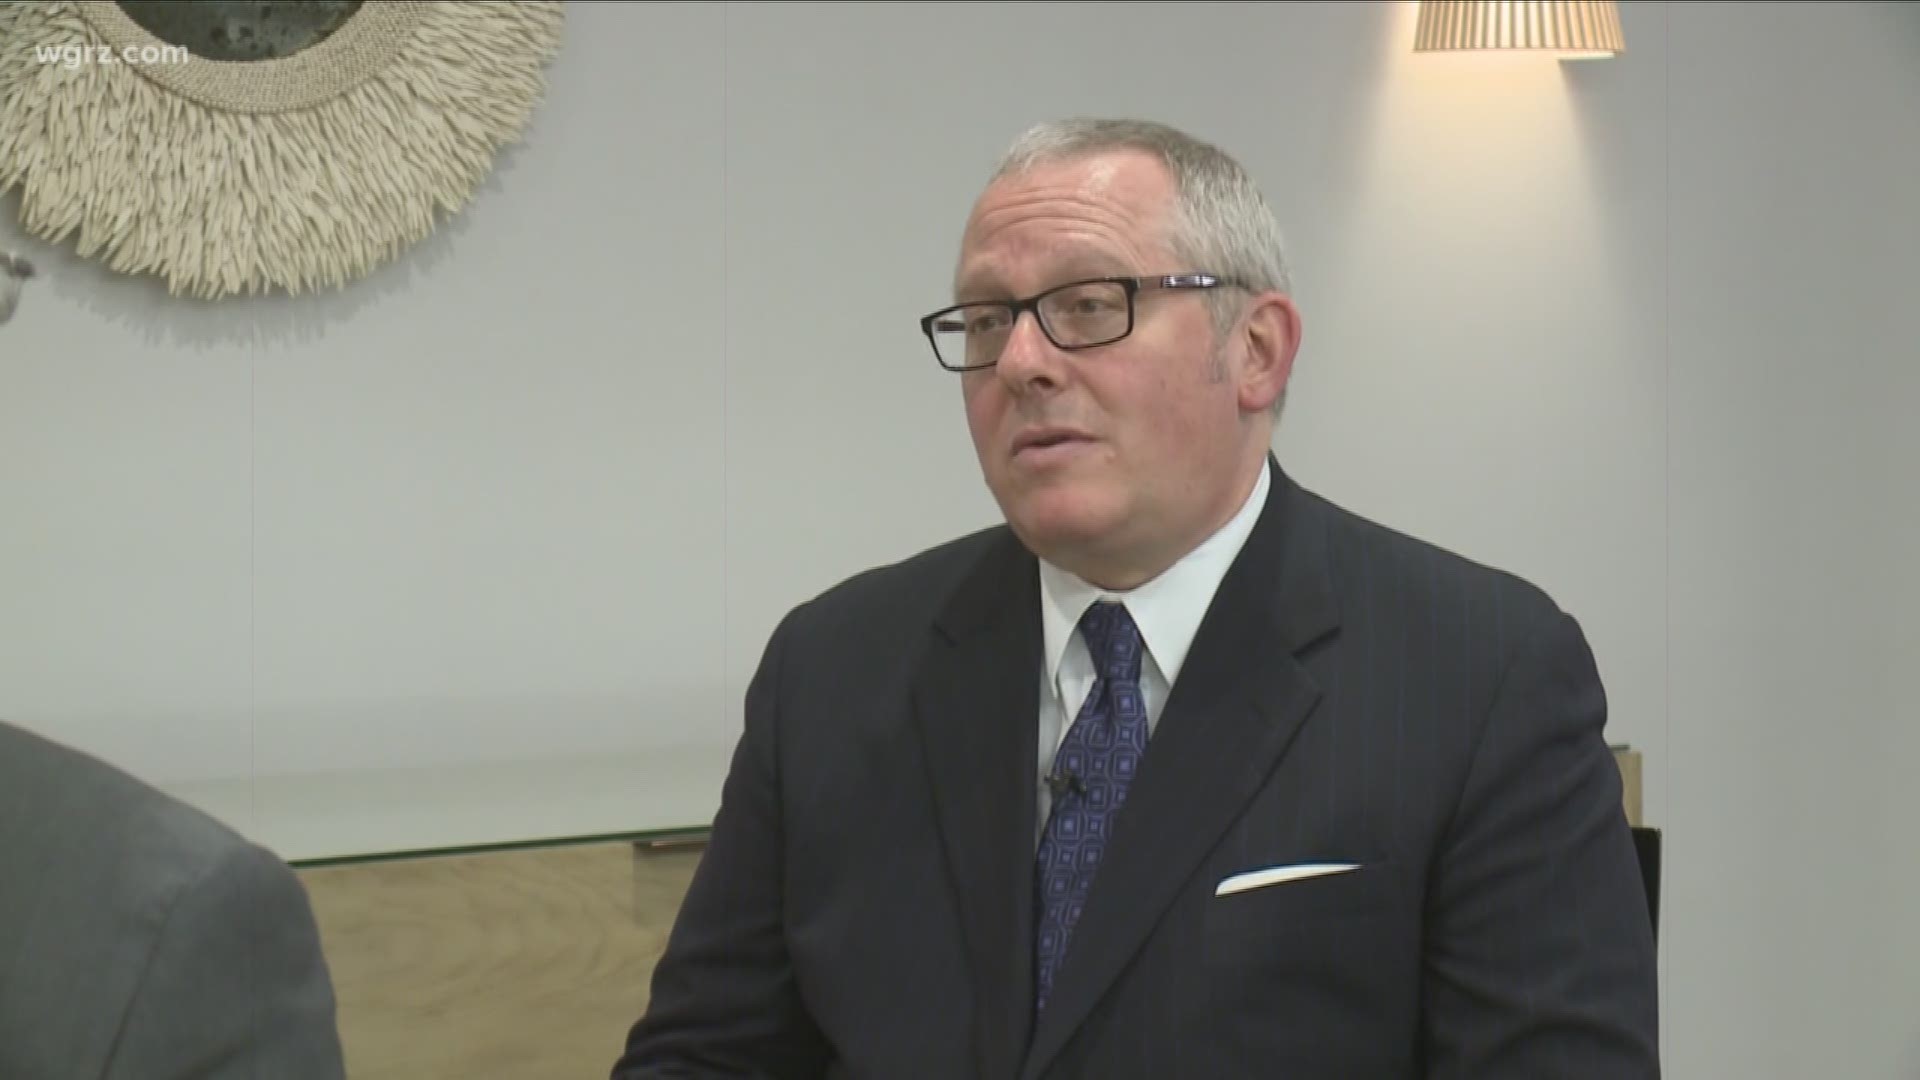 Michael Caputo a former trump aide was asked to submit documents.